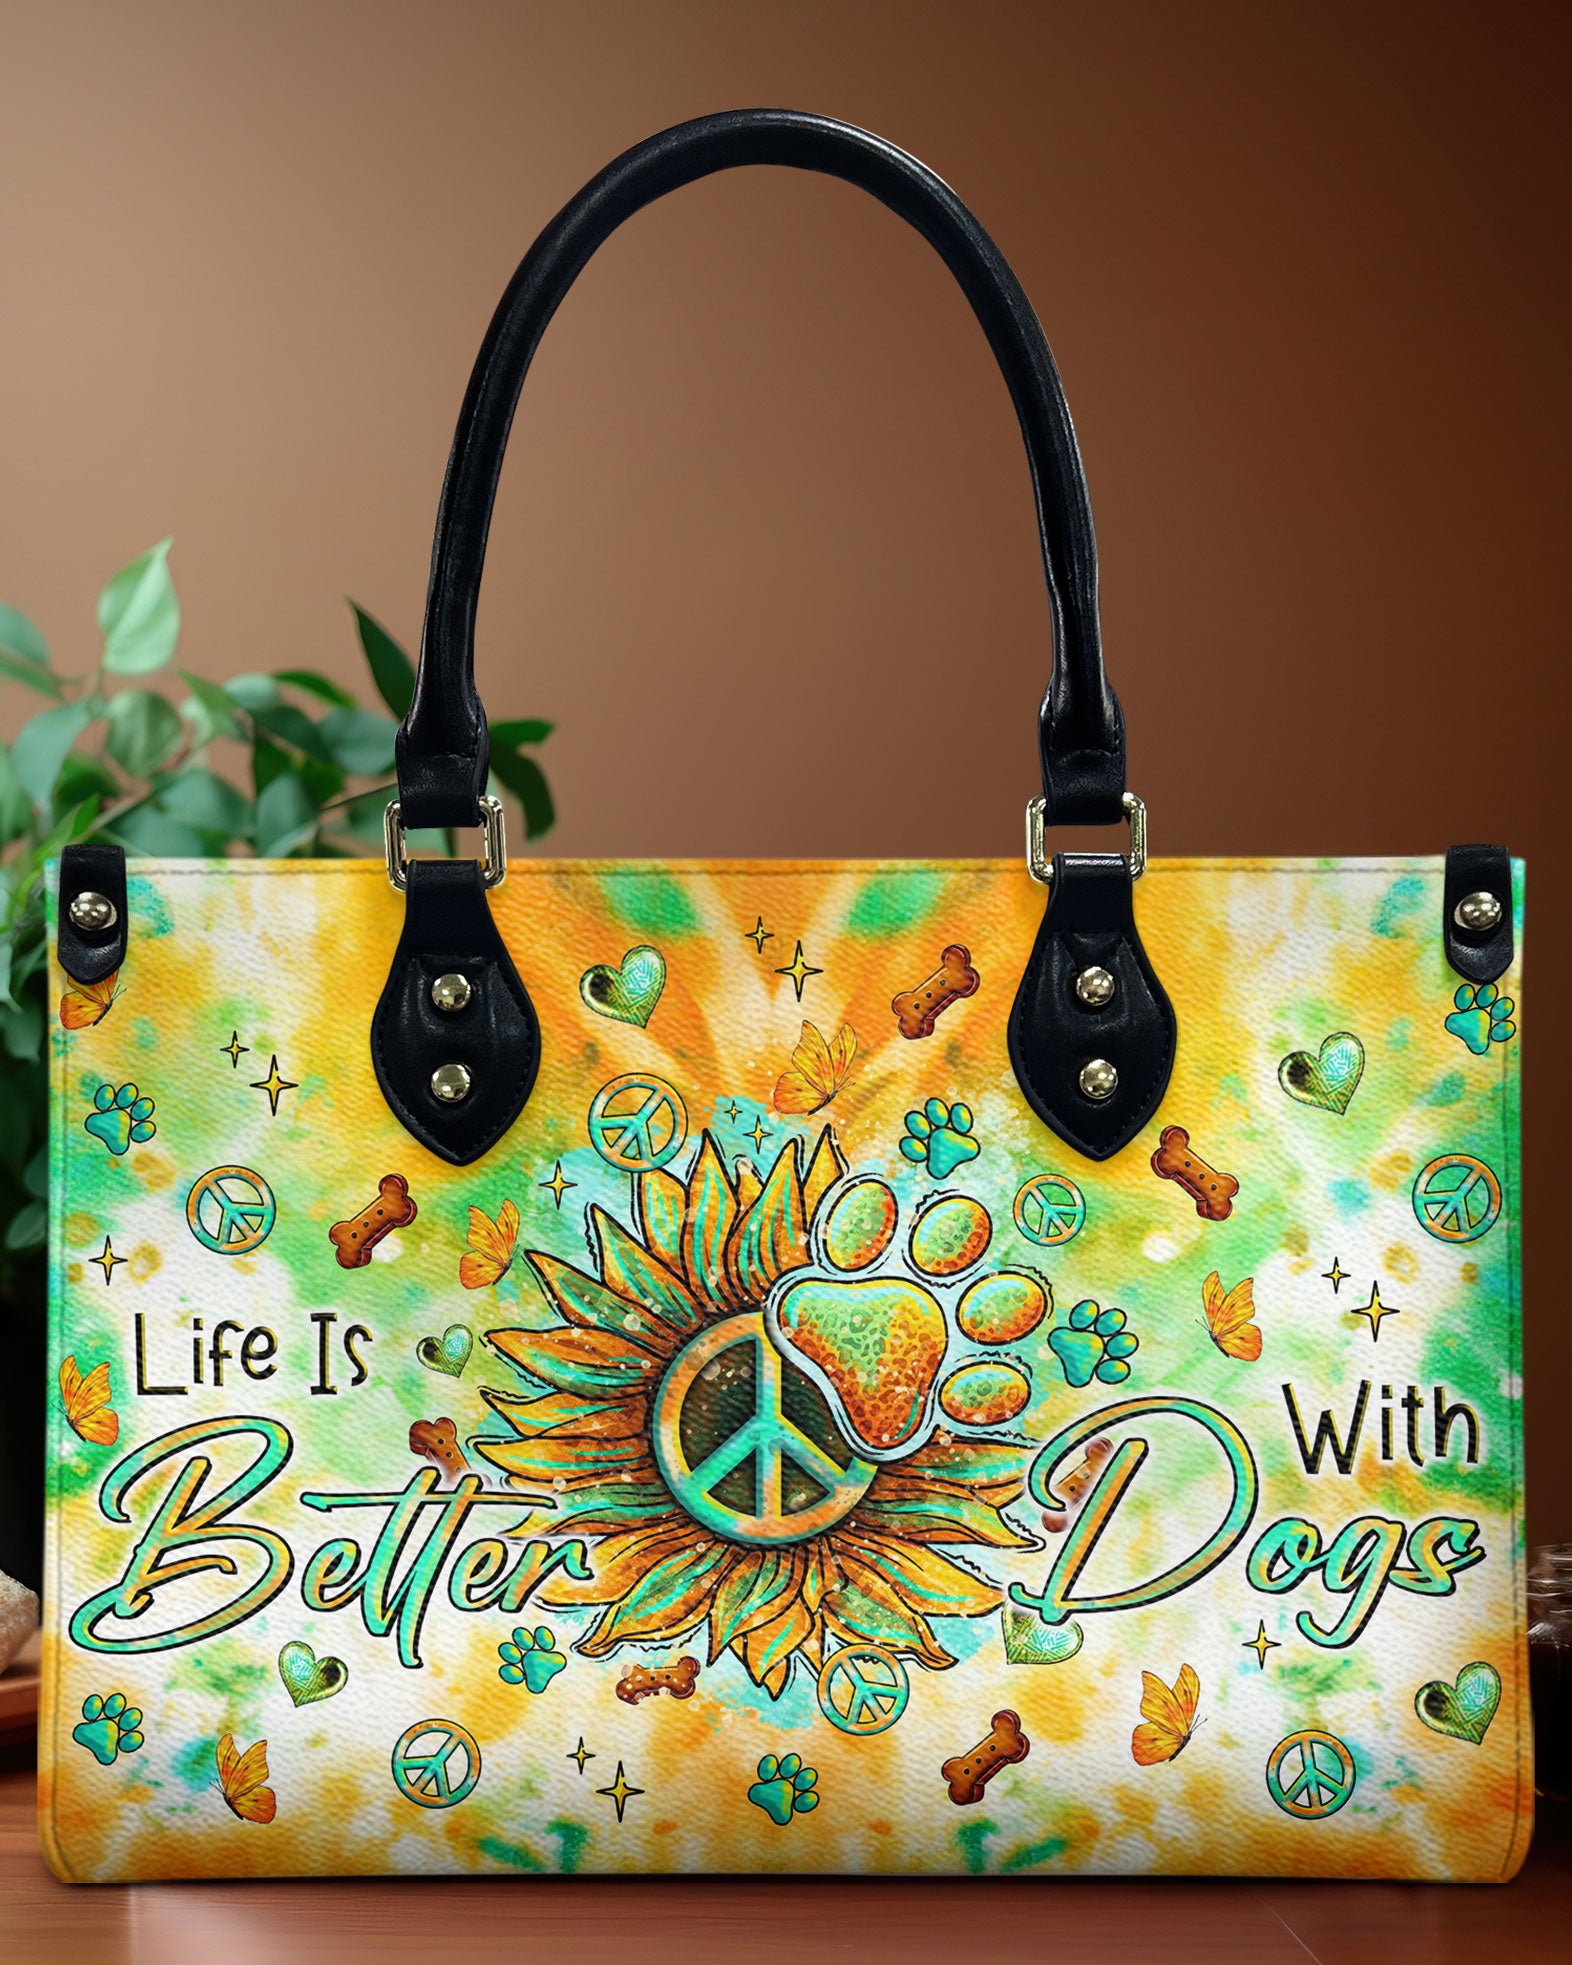 LIFE IS BETTER WITH DOGS SUNFLOWER LEATHER HANDBAG - TLTR2106245